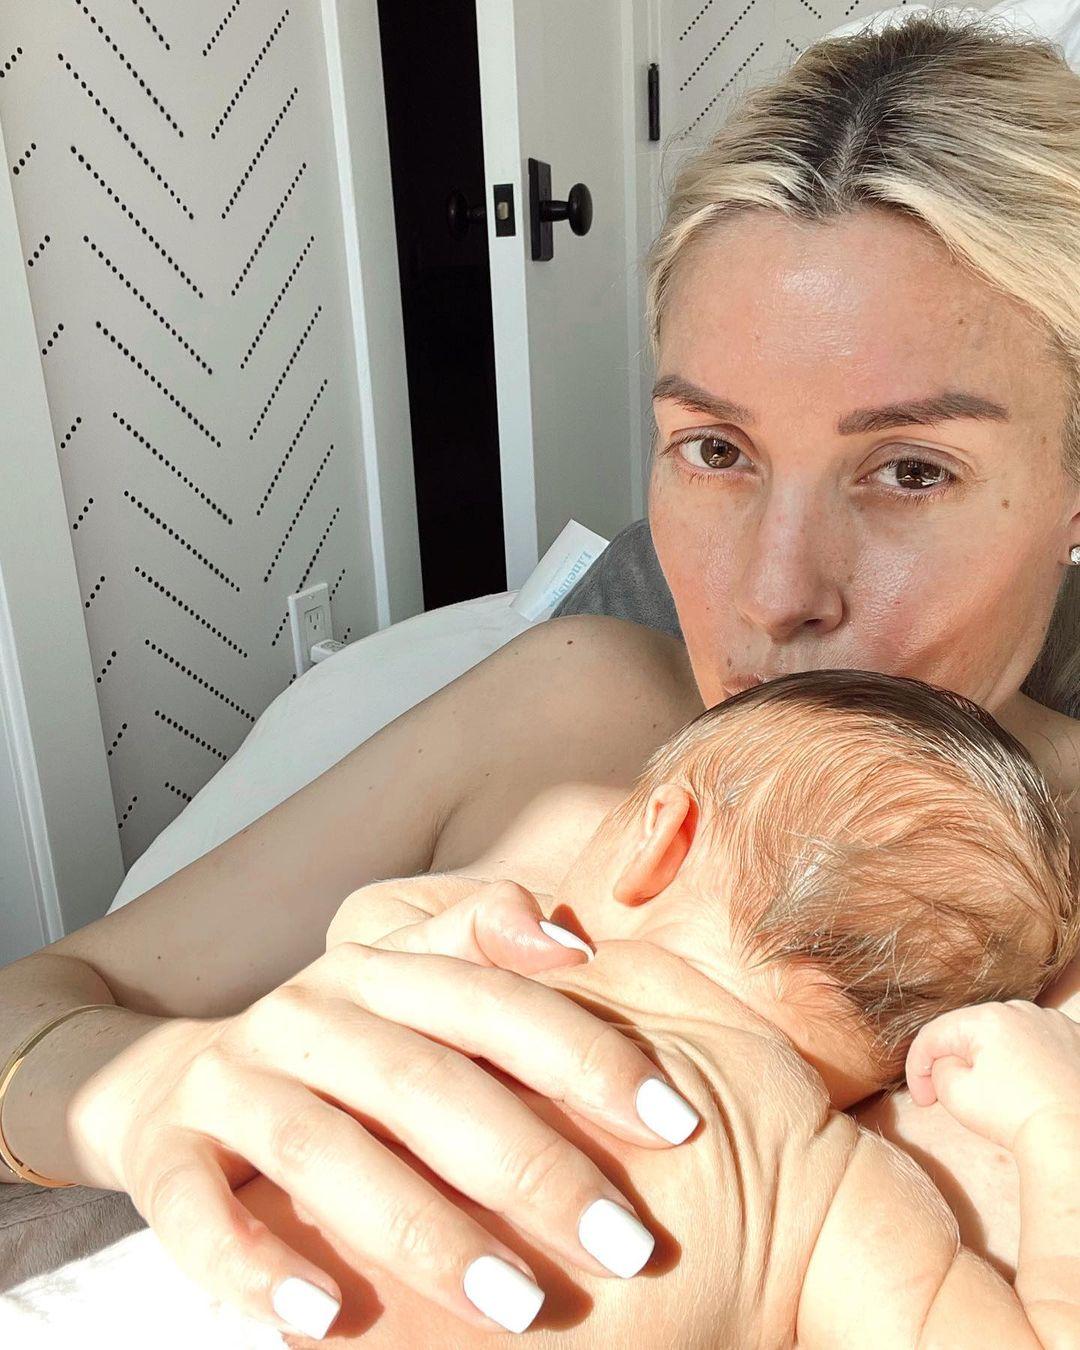 Heather Rae El Moussa Is All About 'Kissing' And 'Snuggling' Newborn This Love Week